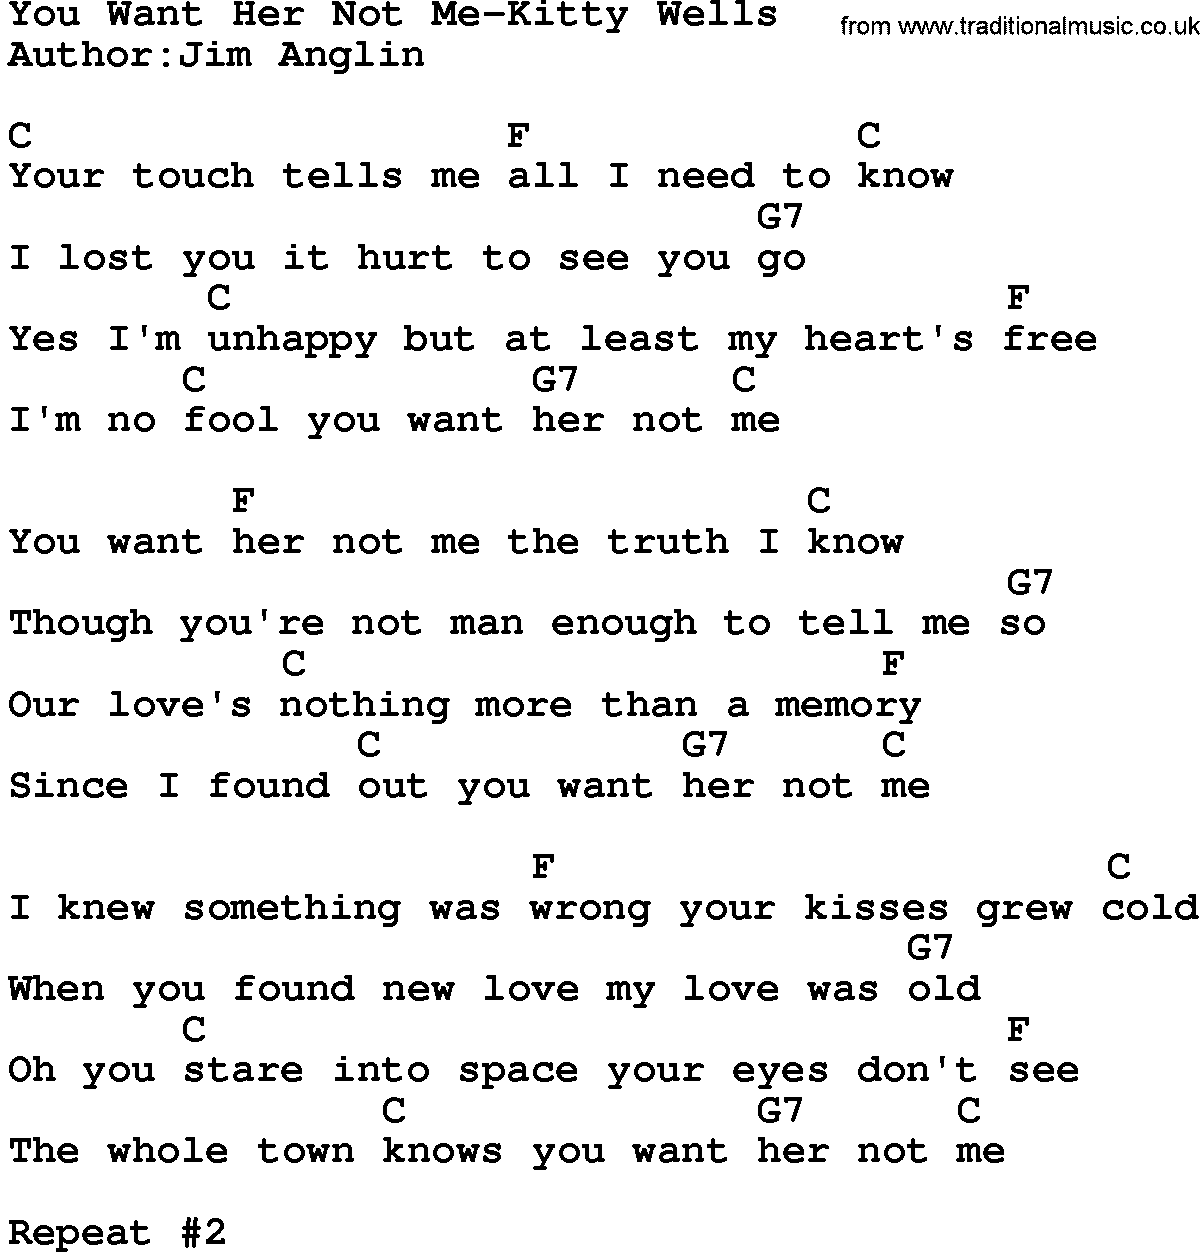 Country music song: You Want Her Not Me-Kitty Wells lyrics and chords